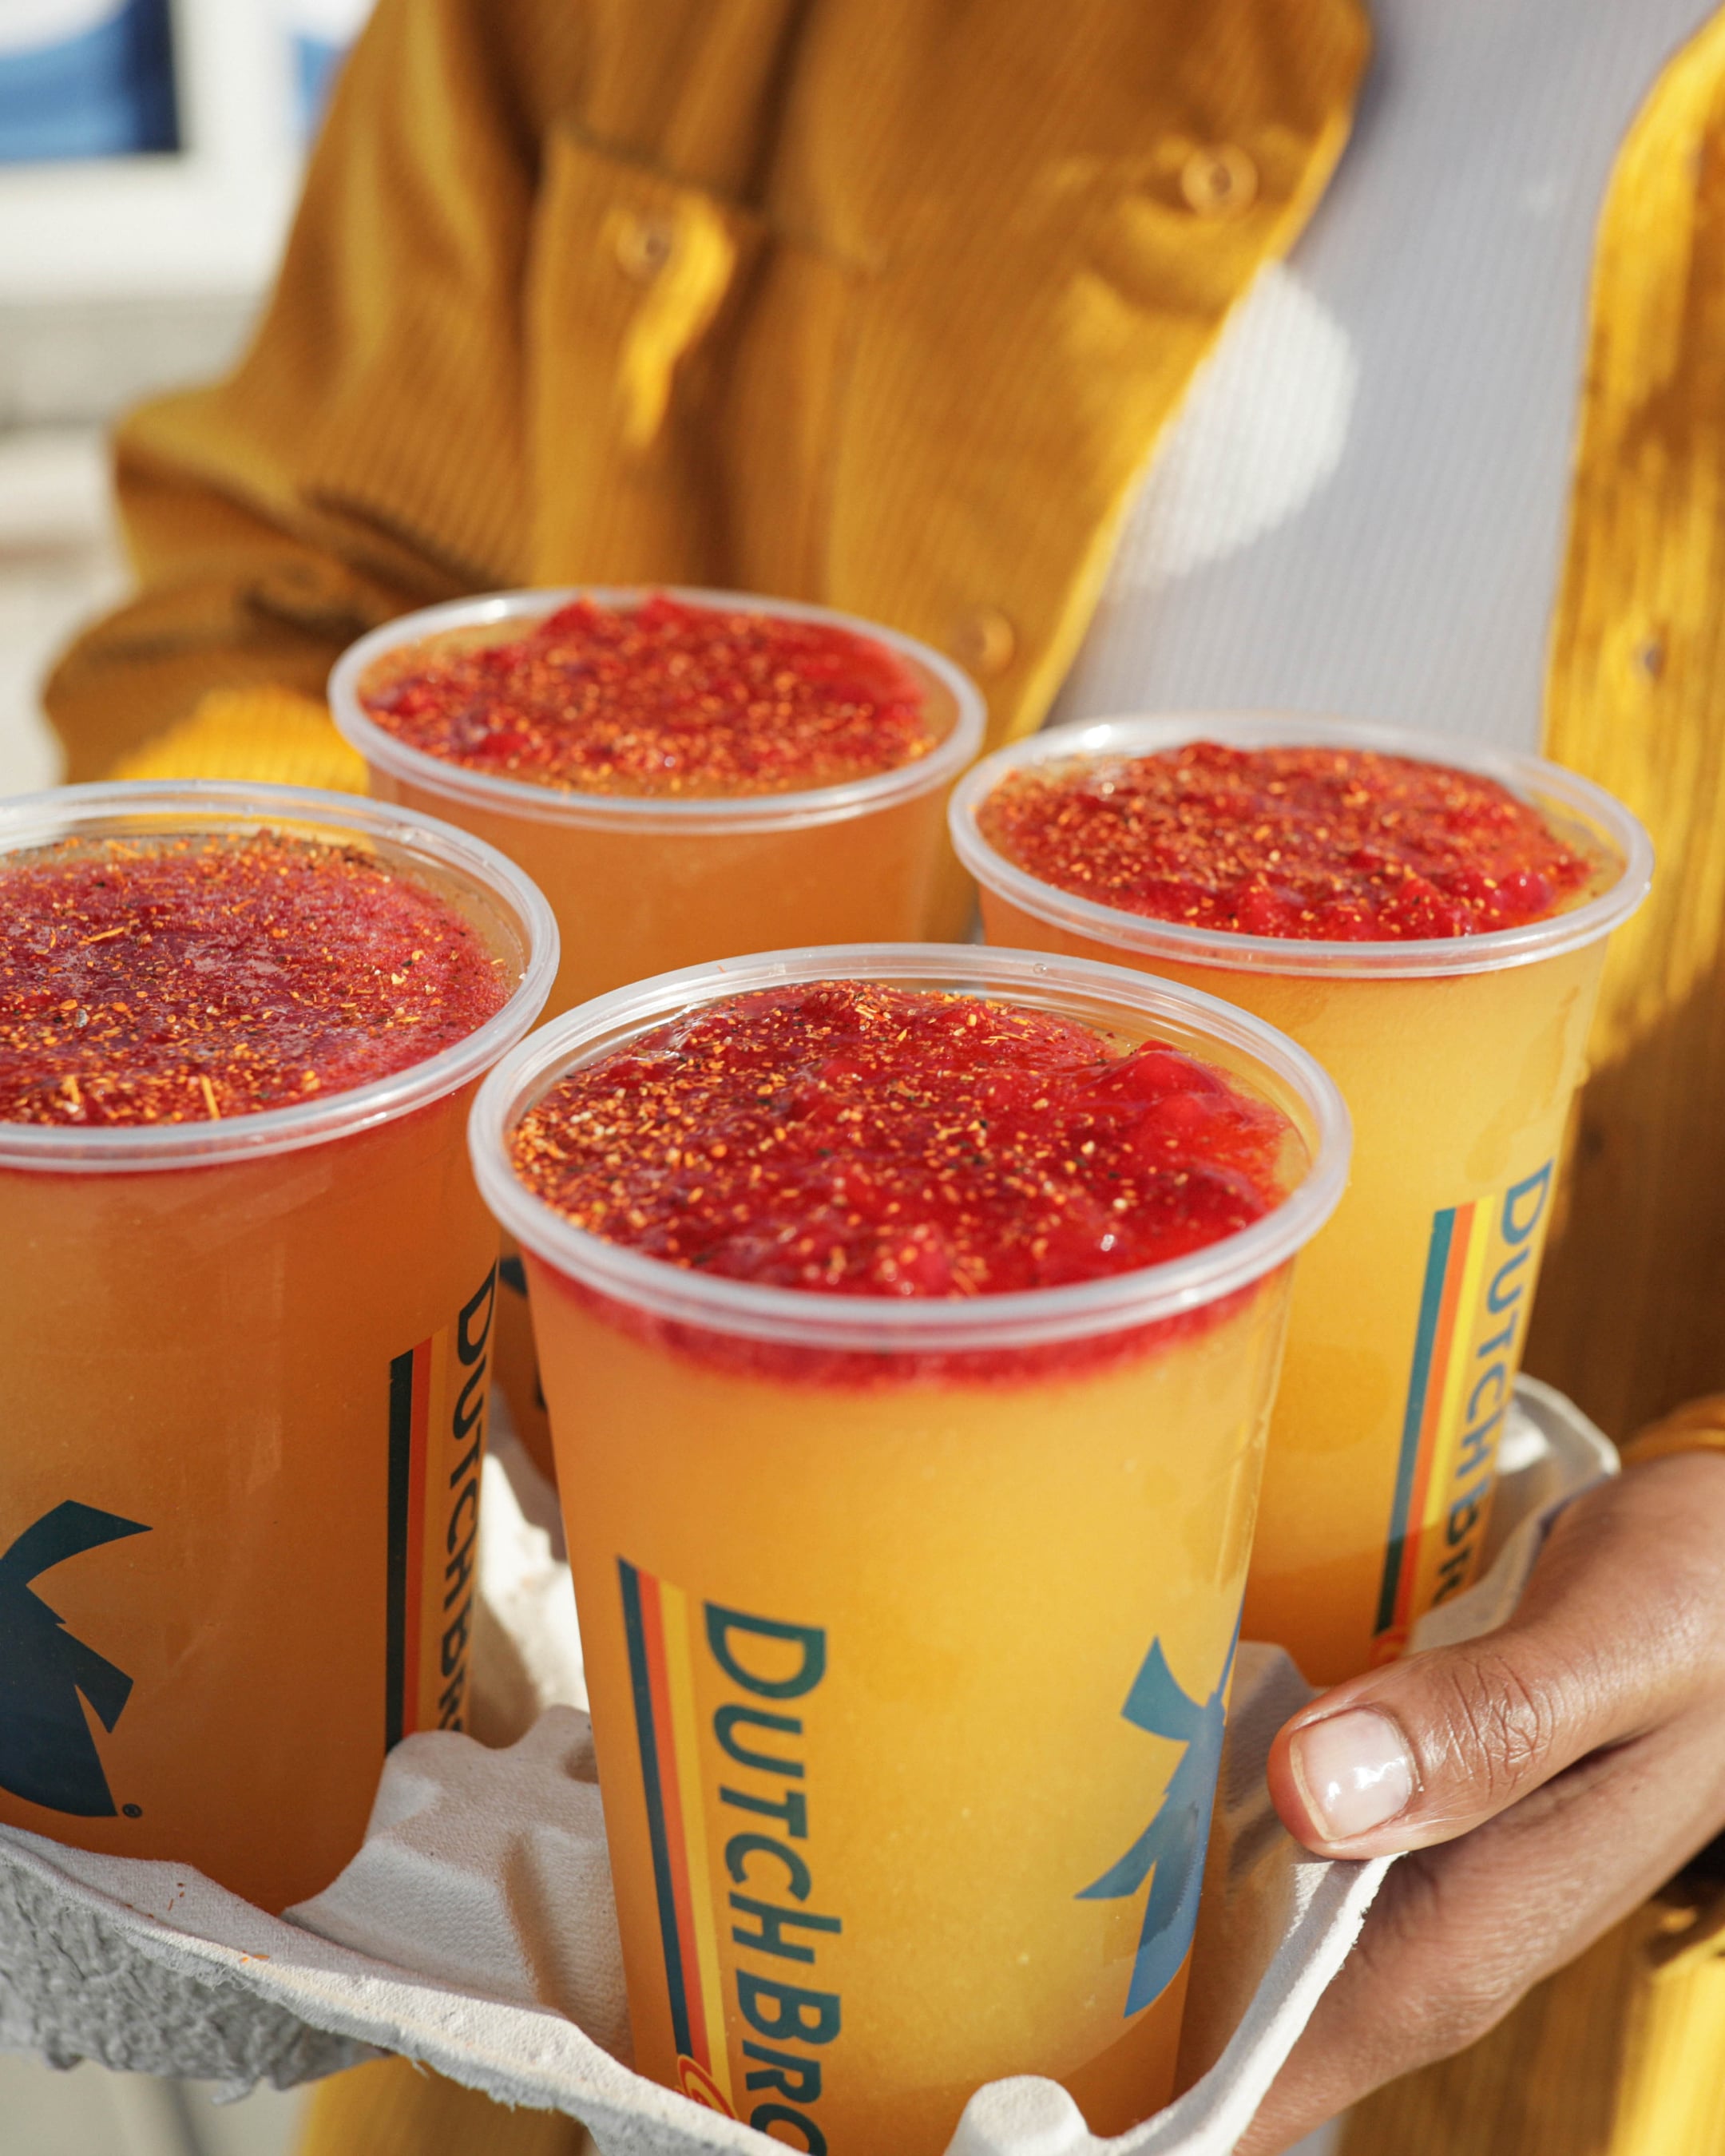 The Mangonada Rebel is inspired by the iconic Mexican treat. This energizing take on a classic features a mix of Dutch Bros’ exclusive energy drink, Rebel, and mangonada flavor topped with Strawberry Real Fruit and Tajín.